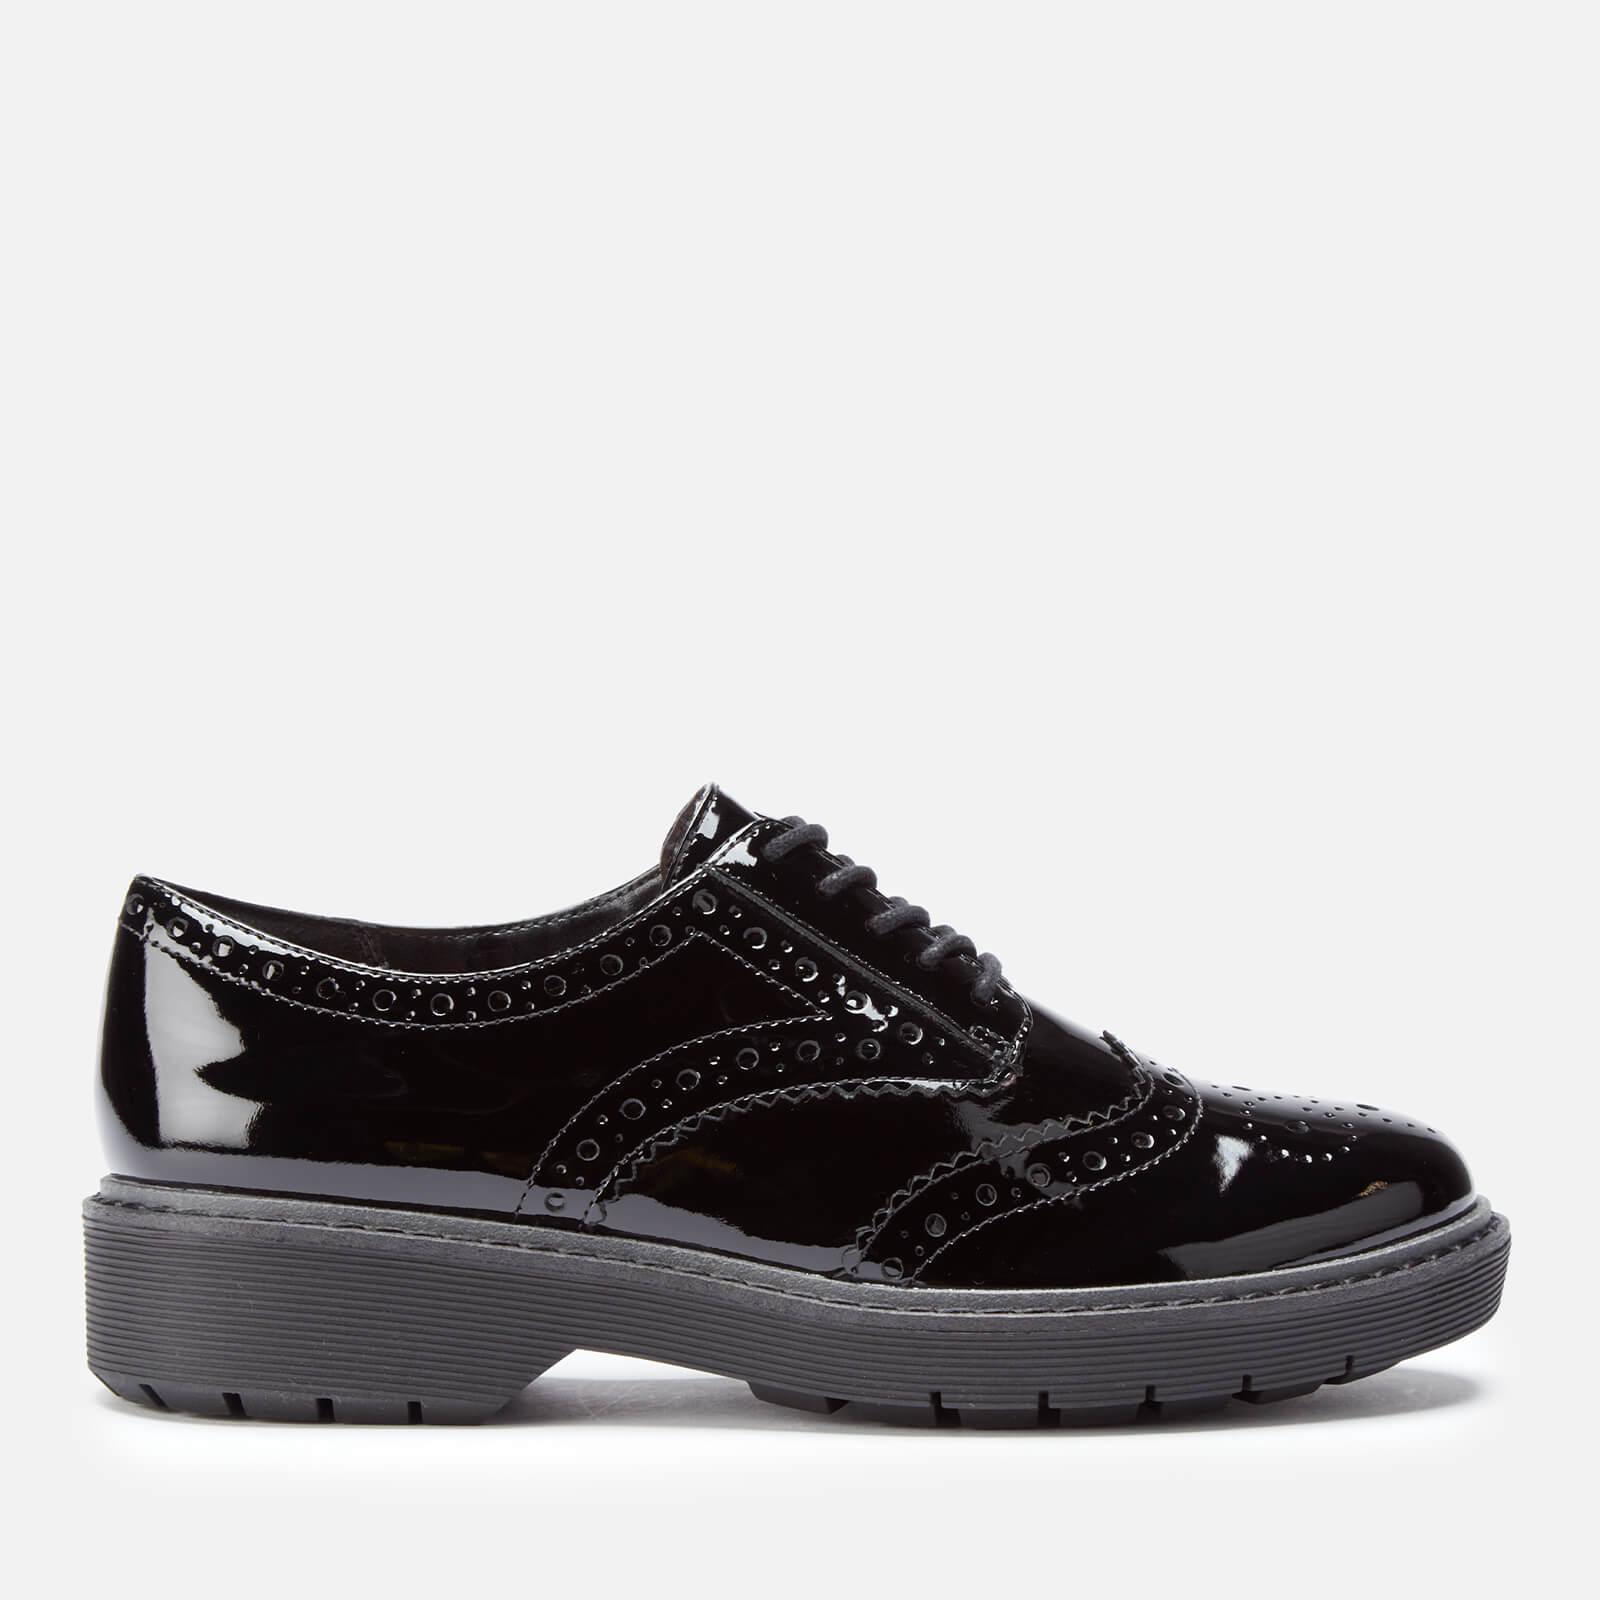 Clarks Alexa Darcy Patent Brogues in 